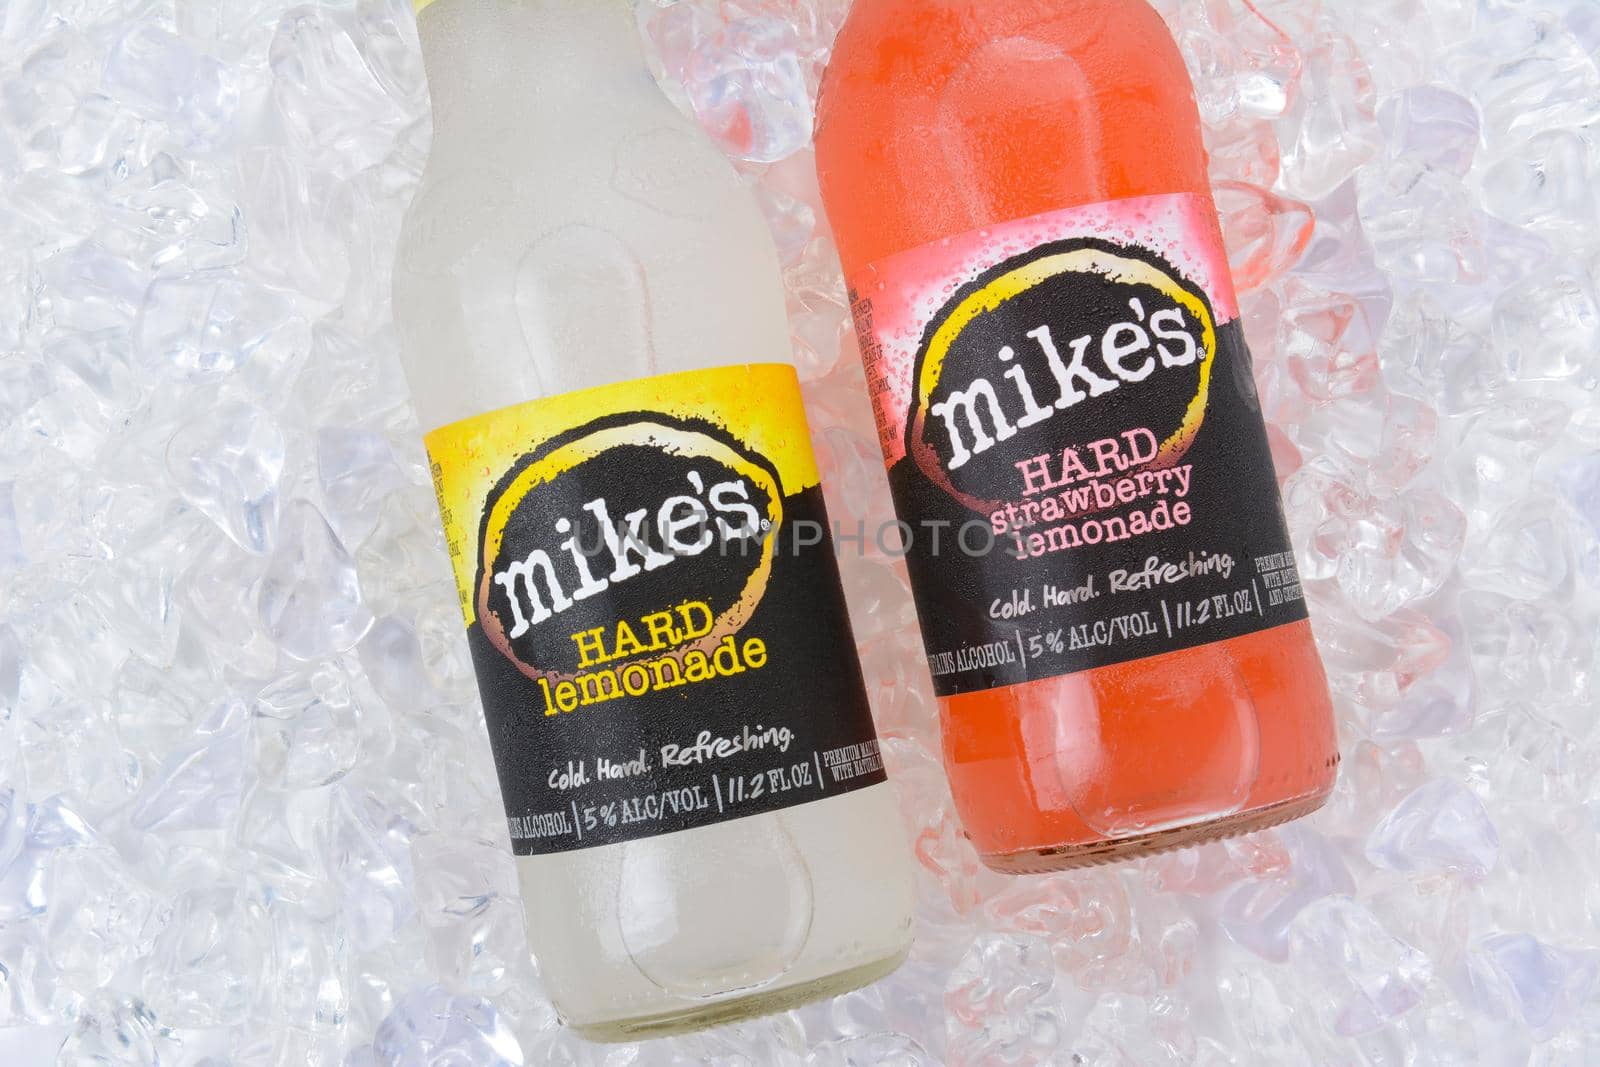 Two bottles of Mikes Hard Lemonade on ice by sCukrov